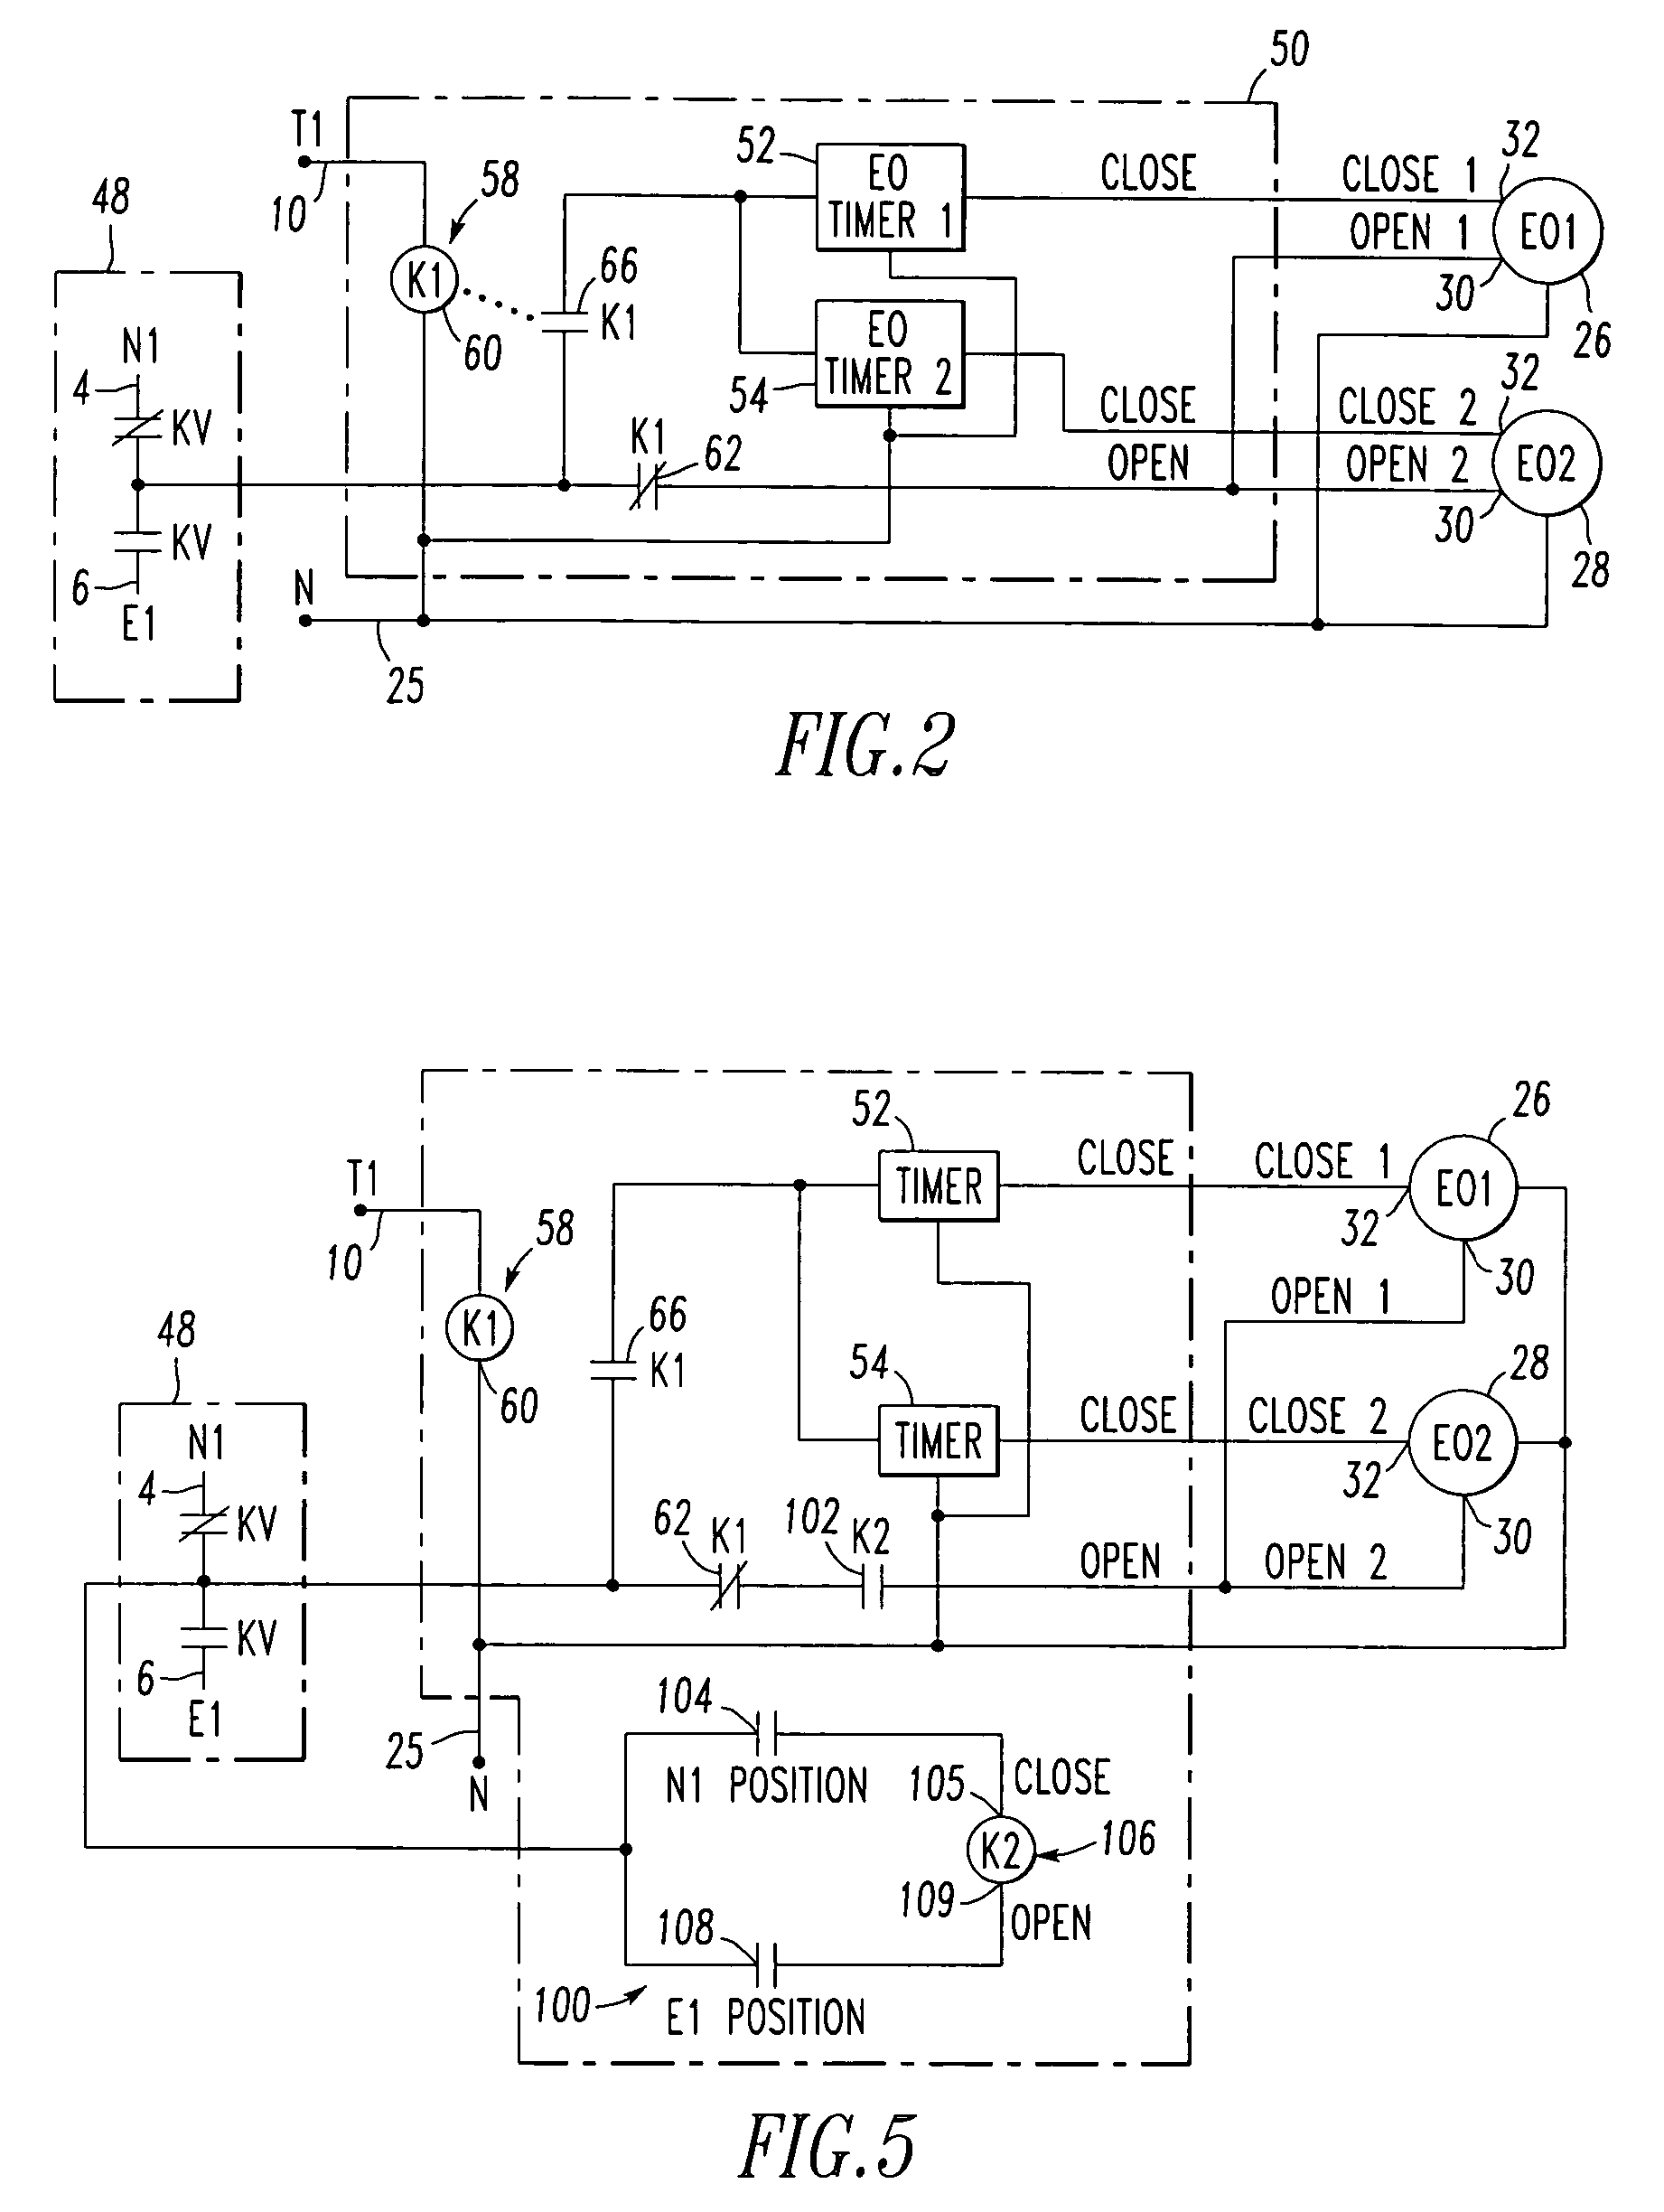 Power distribution system and control system for same